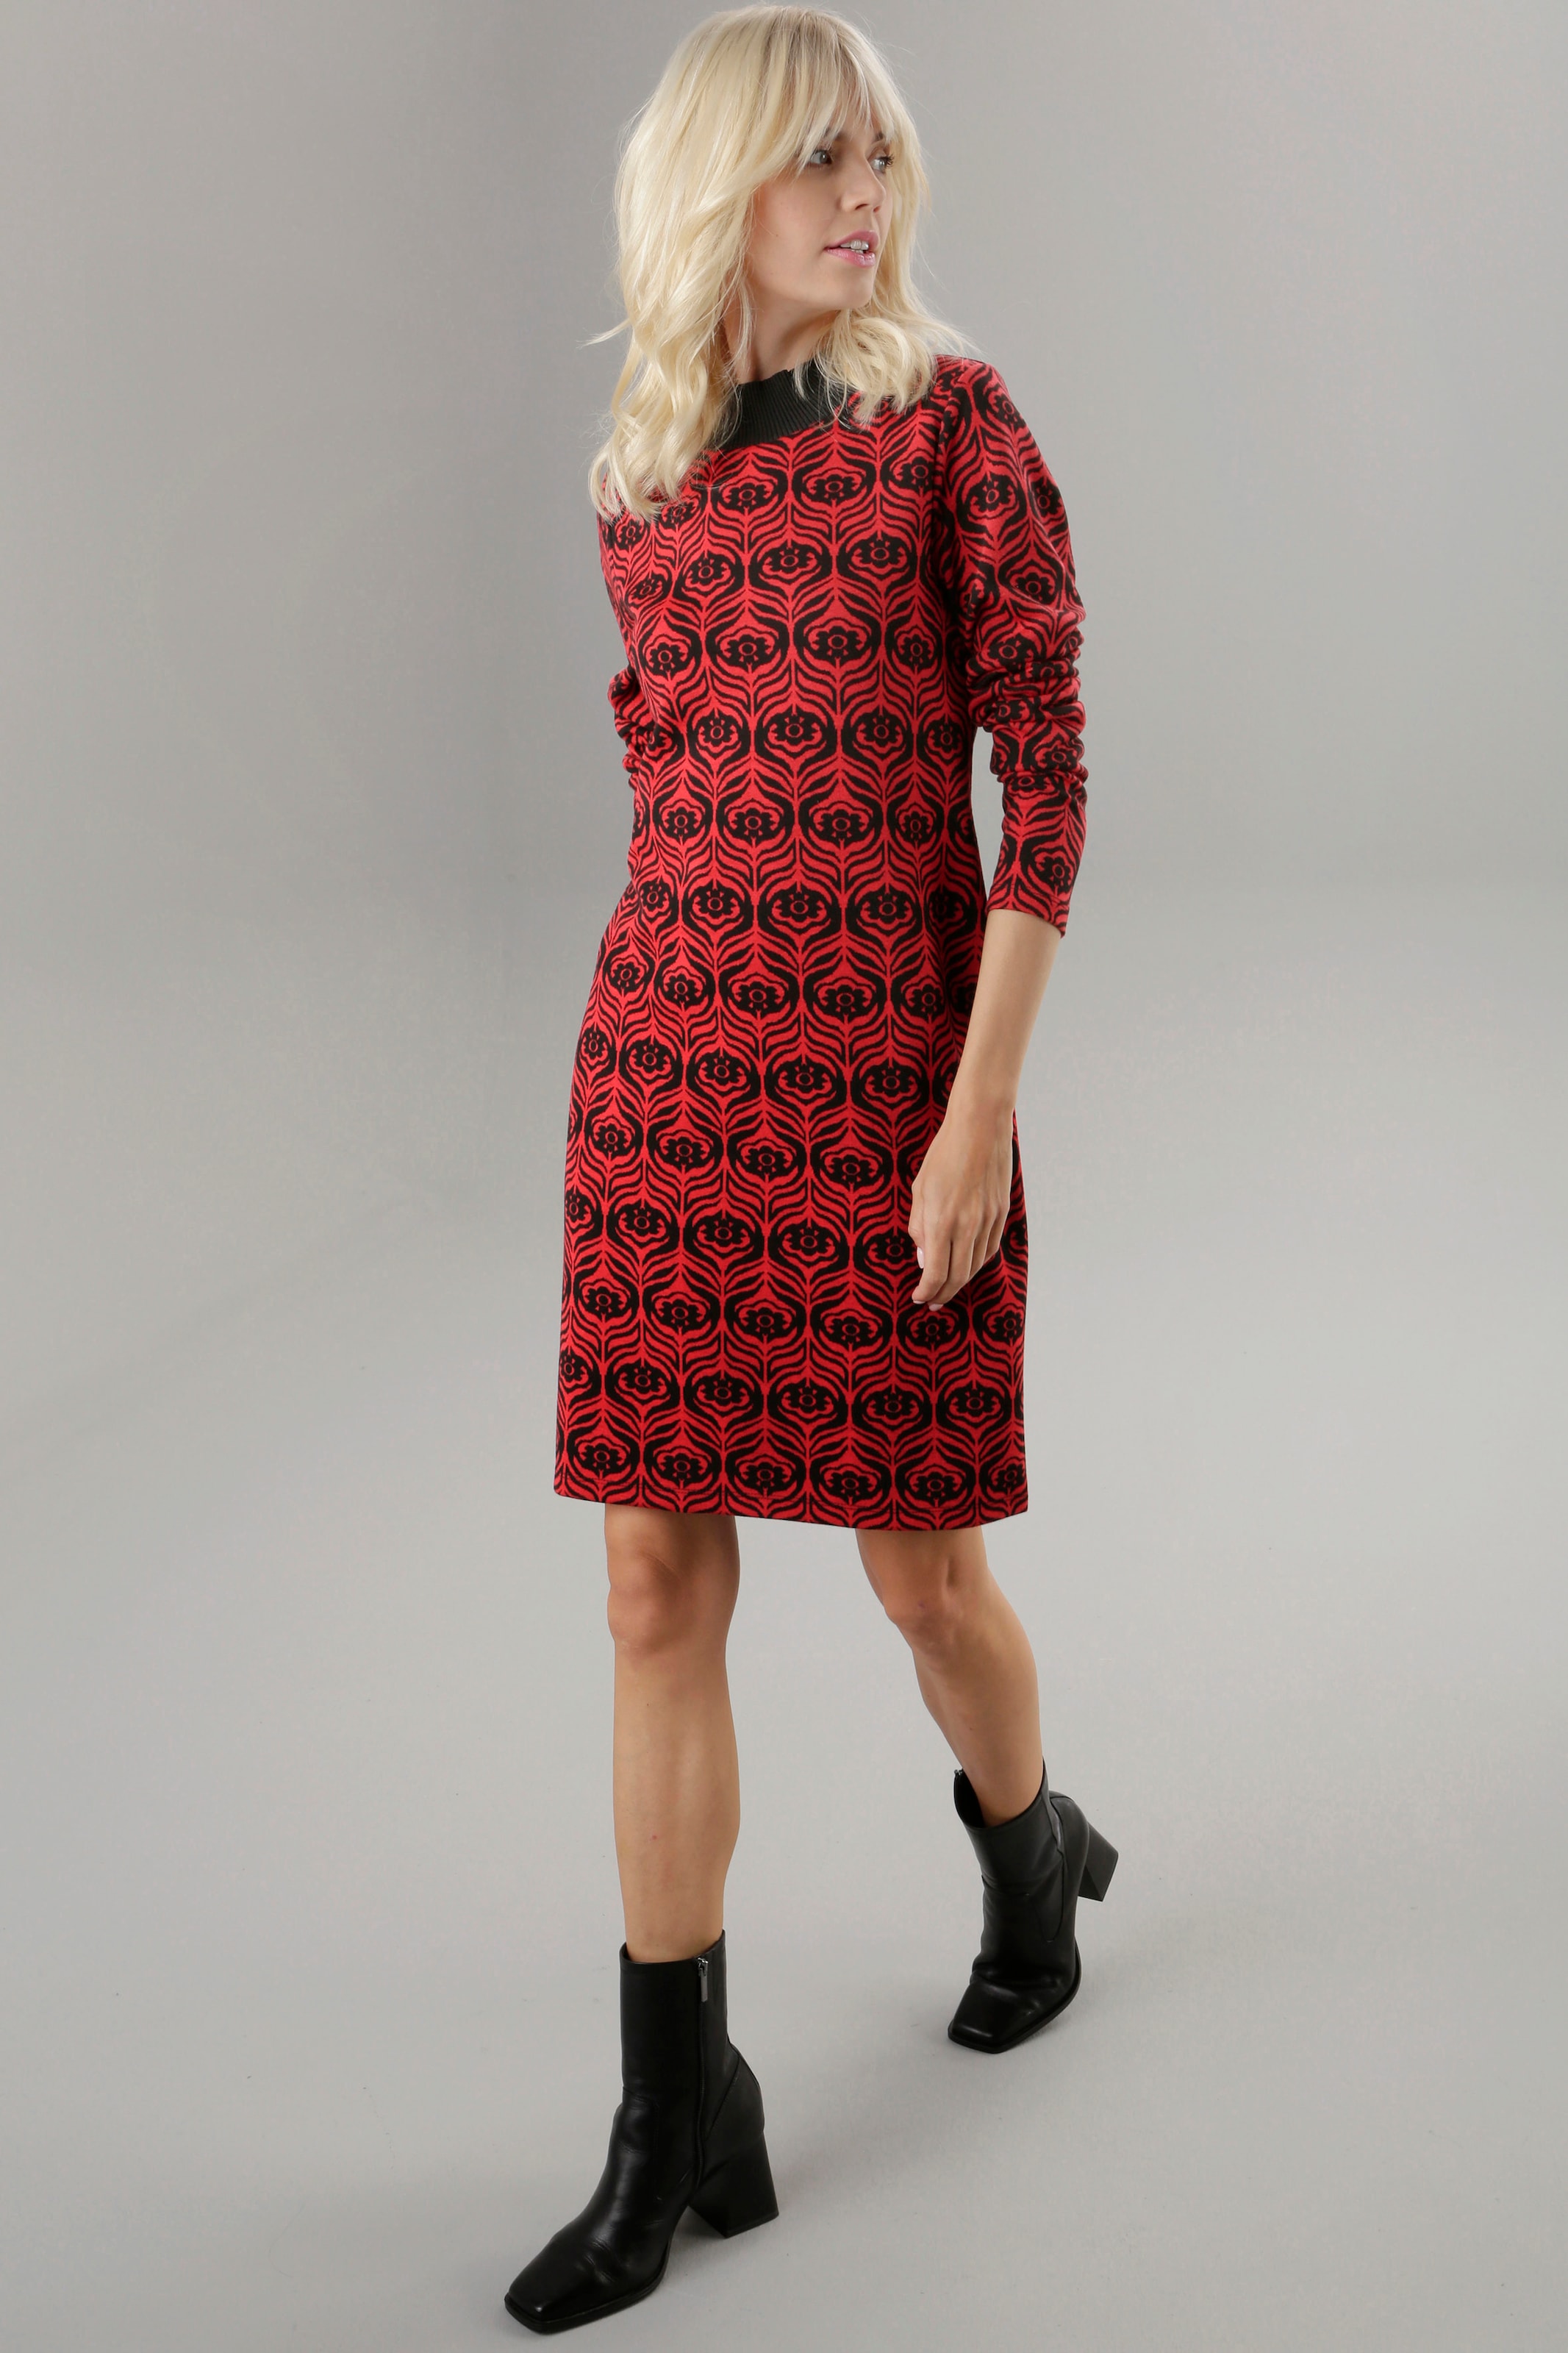 Aniston Retro-Muster mit bei Jerseykleid, SELECTED online